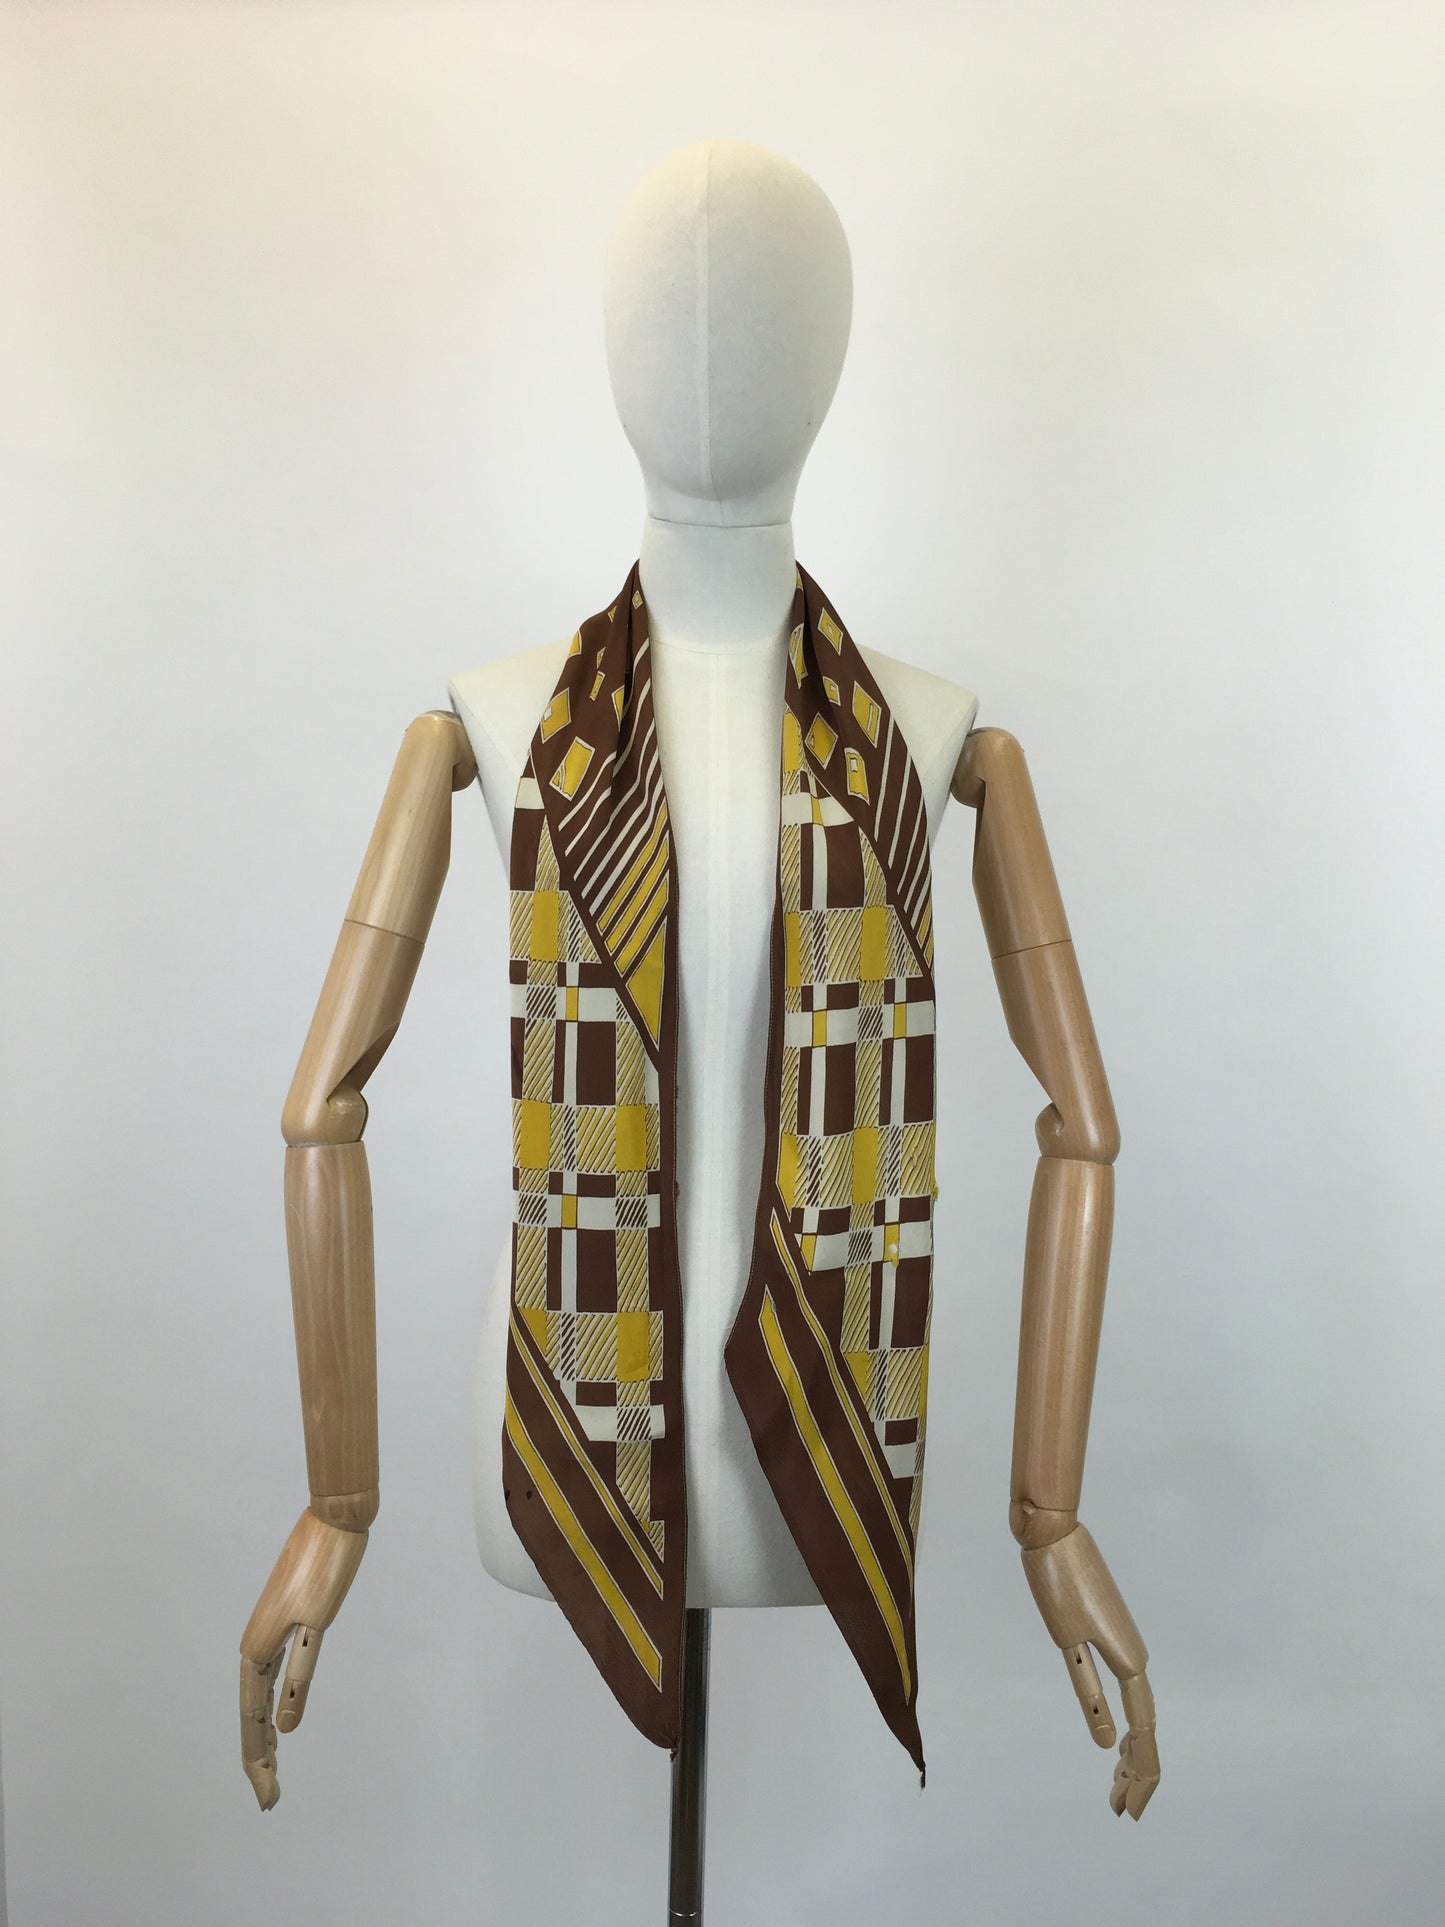 Original 1930’s Rayon Deco Pointed Scarf - In Mustards, Ivory and Warm Brown